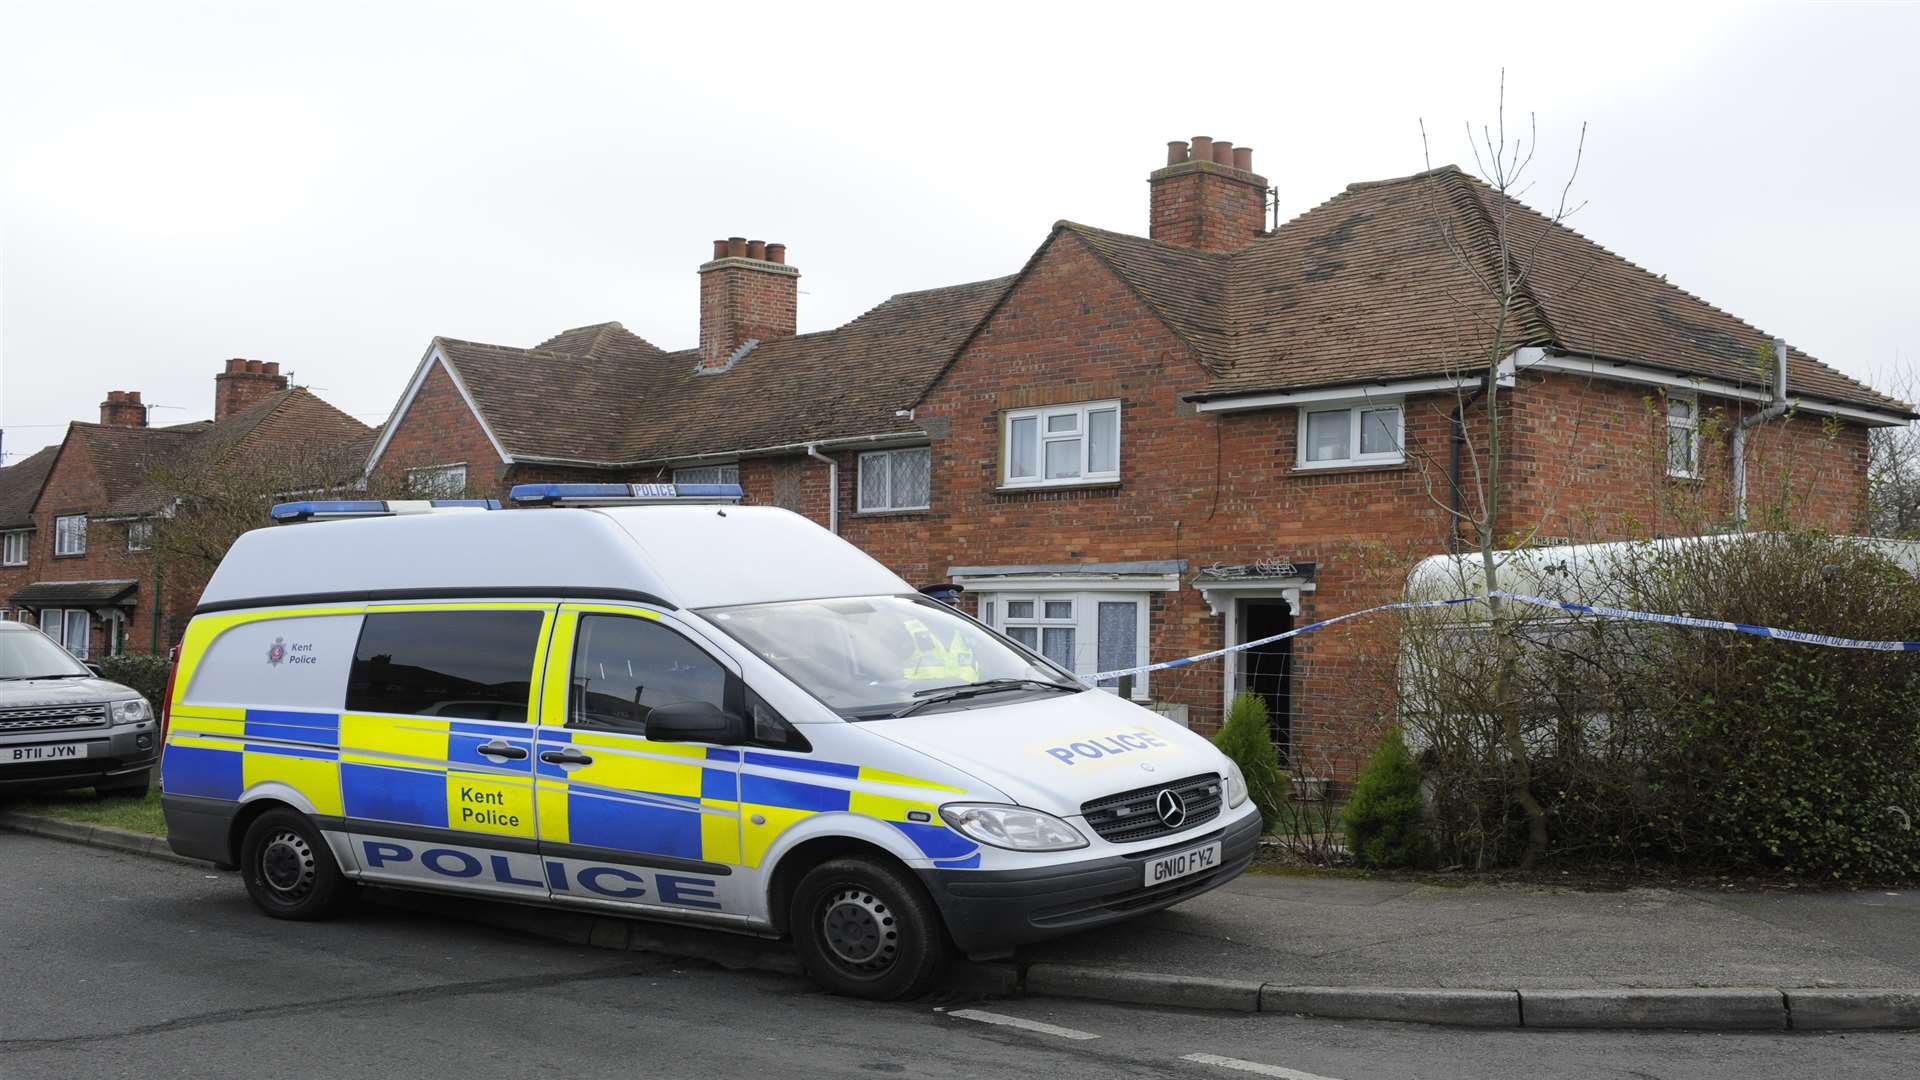 The house in Hersden was cordoned off by police. Picture: Tony Flashman